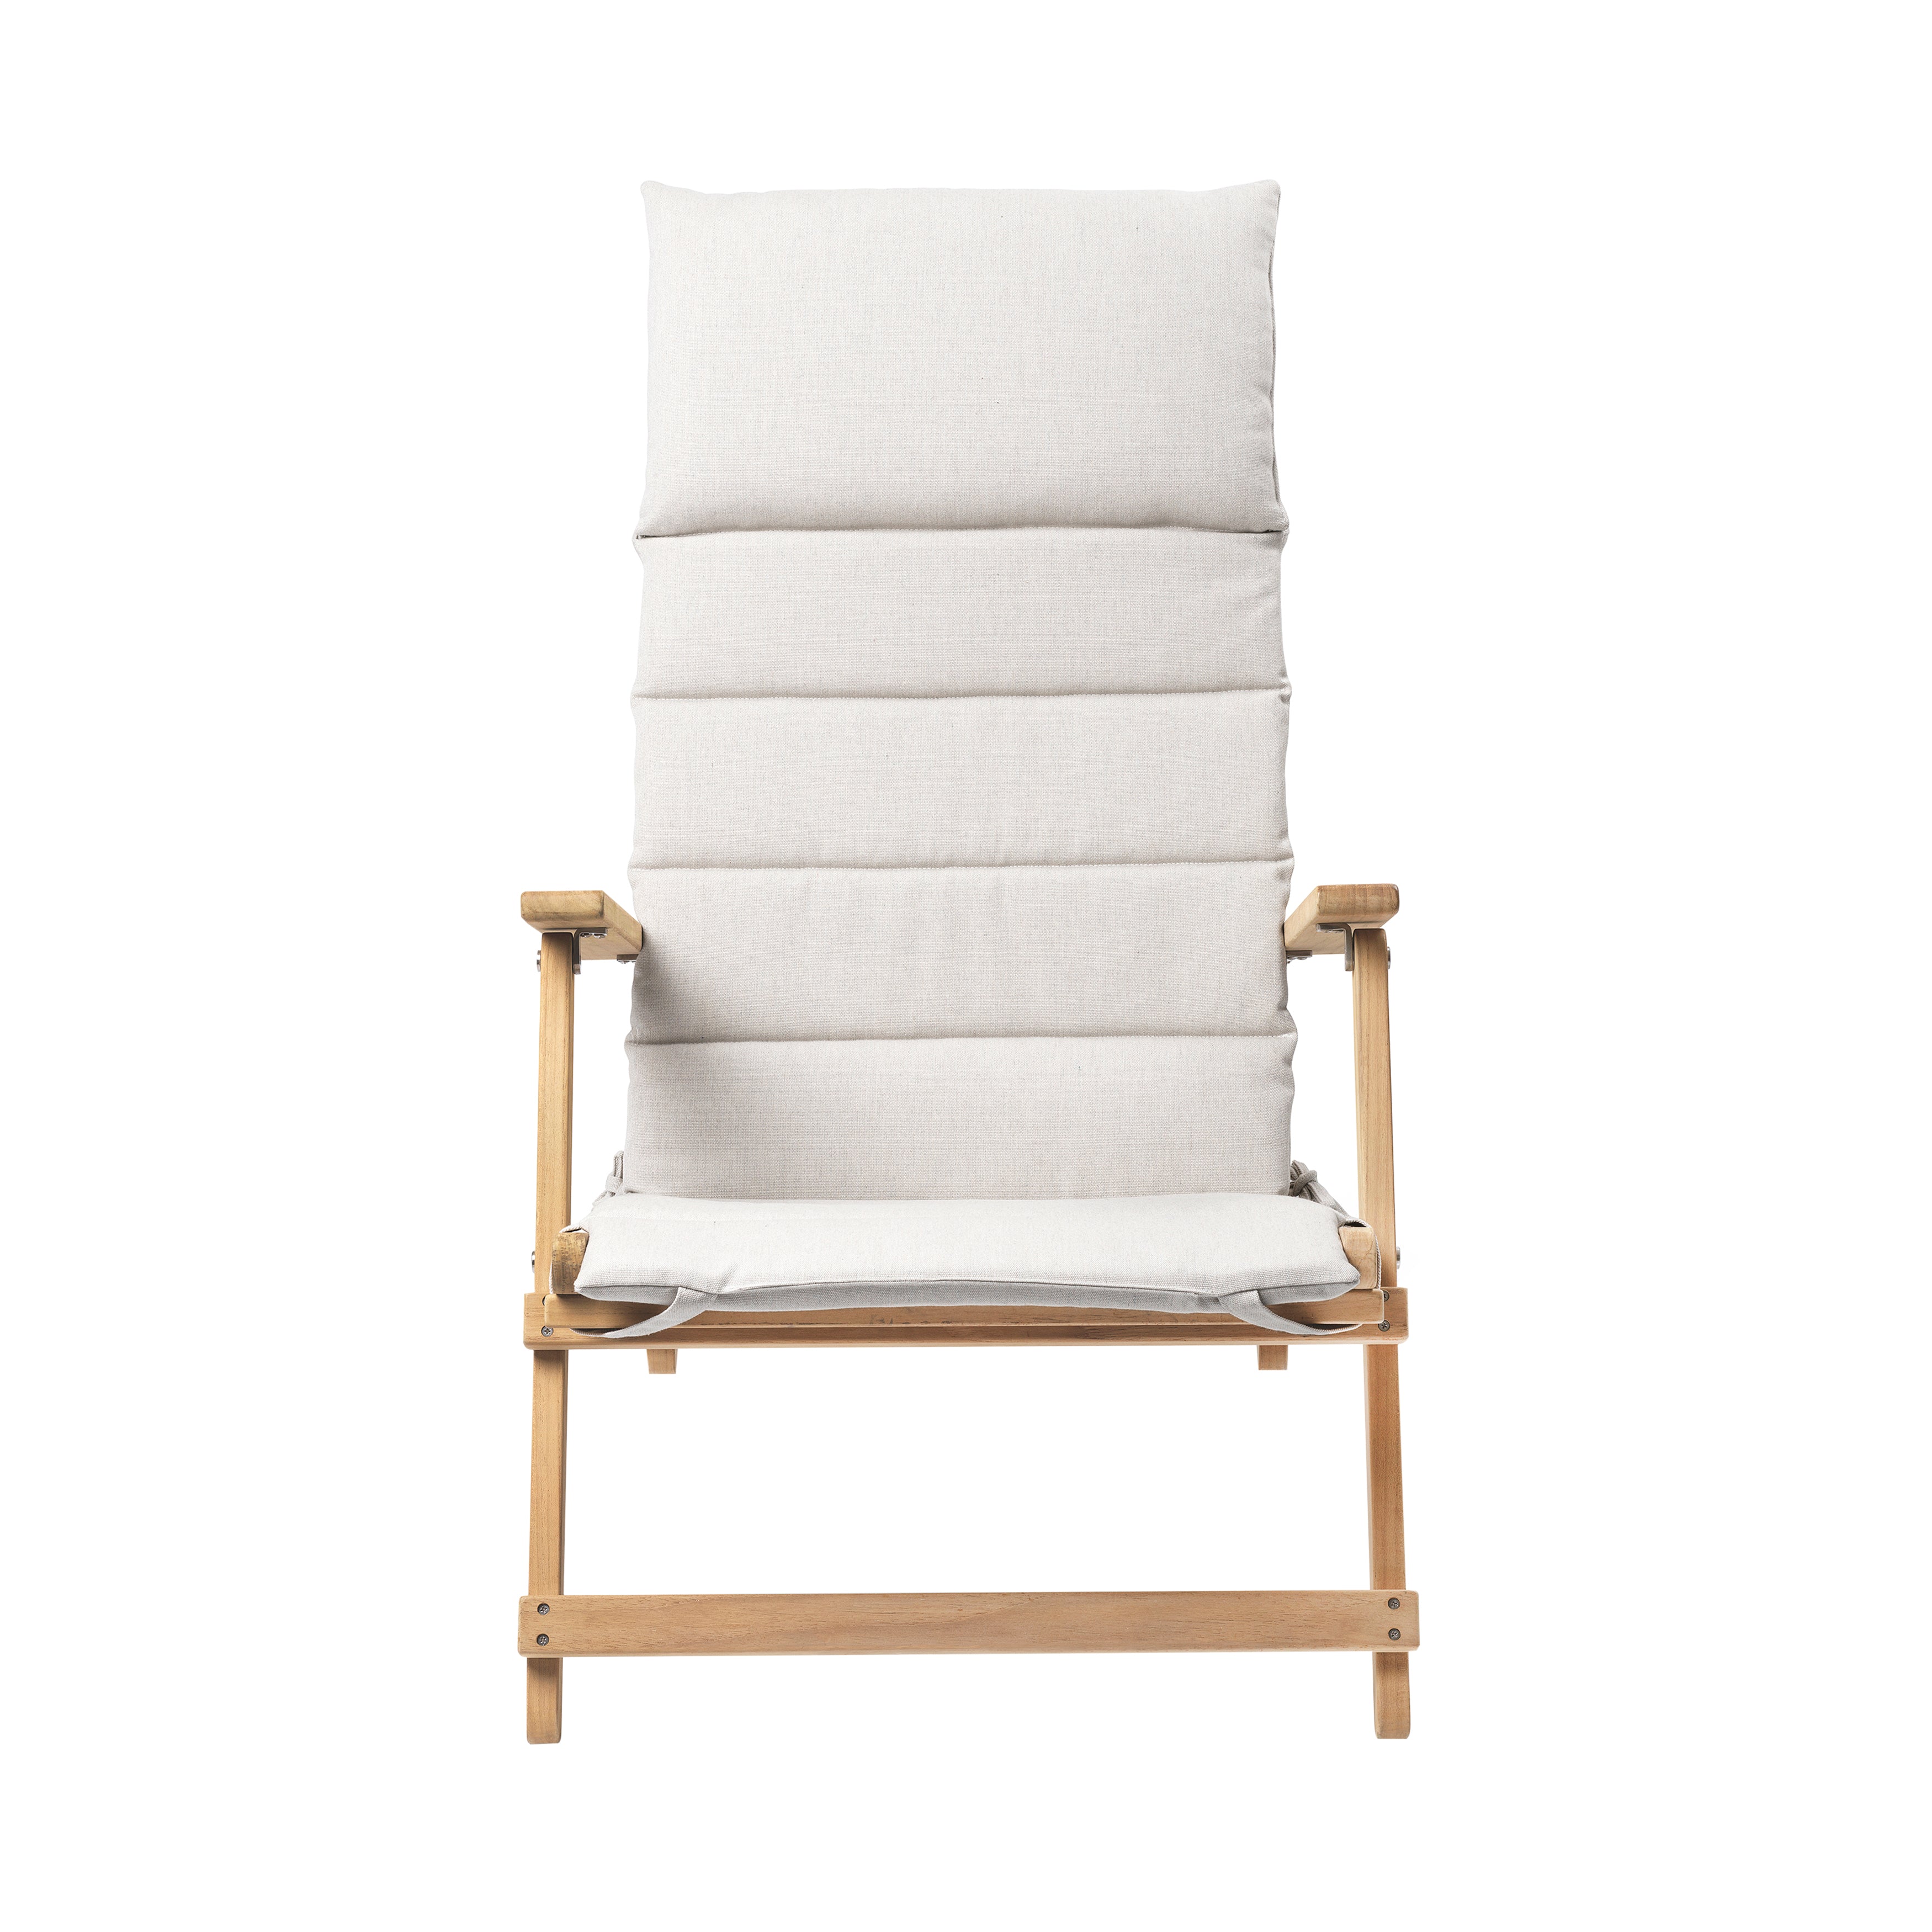 BM5568 Outdoor Deck Chair: With Cushion